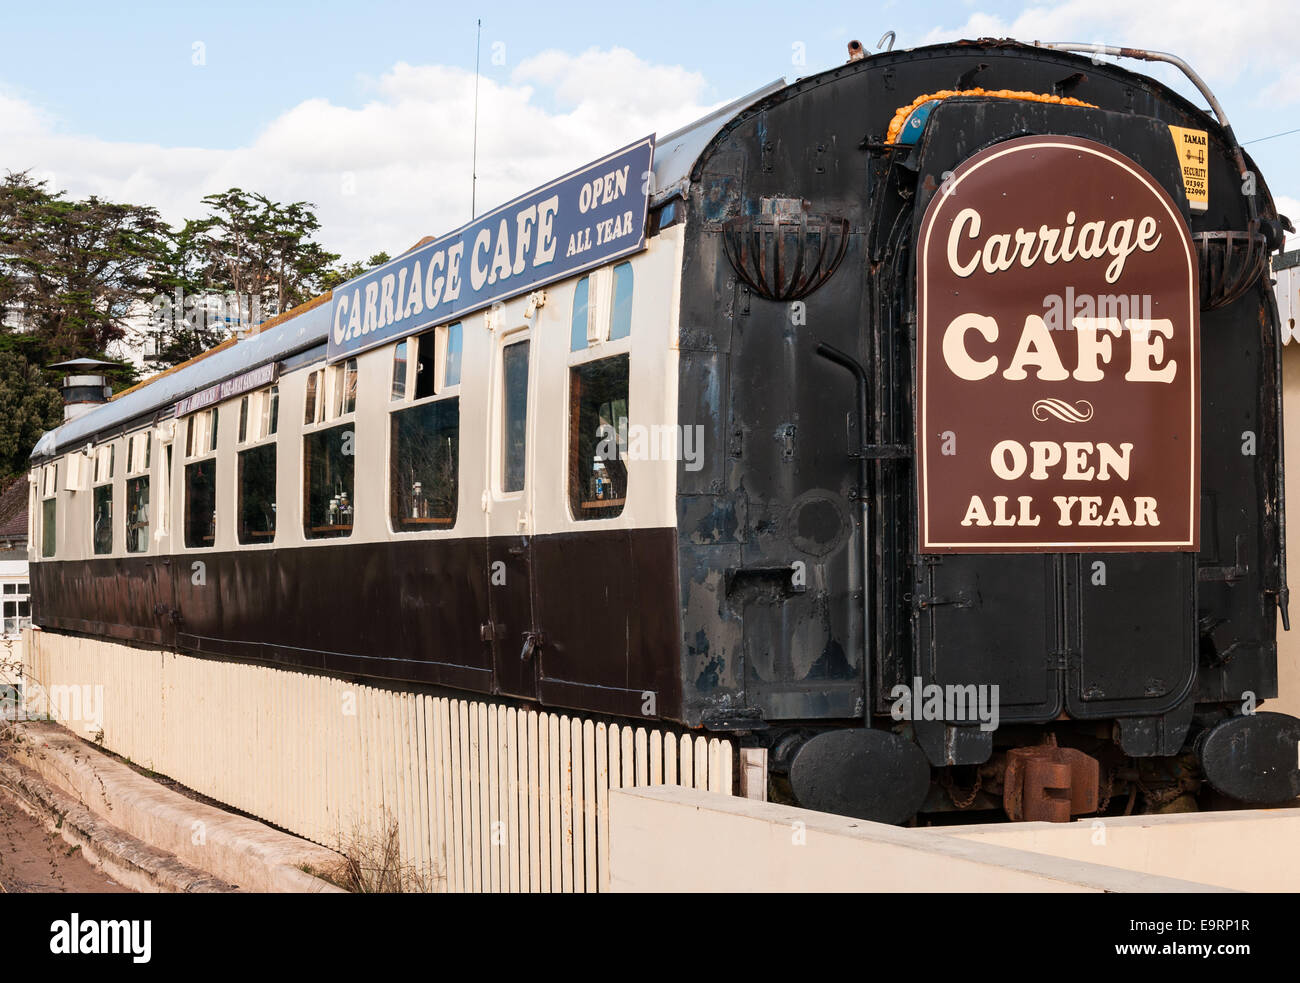 An old vintage railway carriage that has been converted into a diner cafe café with  sign saying Open All Year at Exmouth Stock Photo